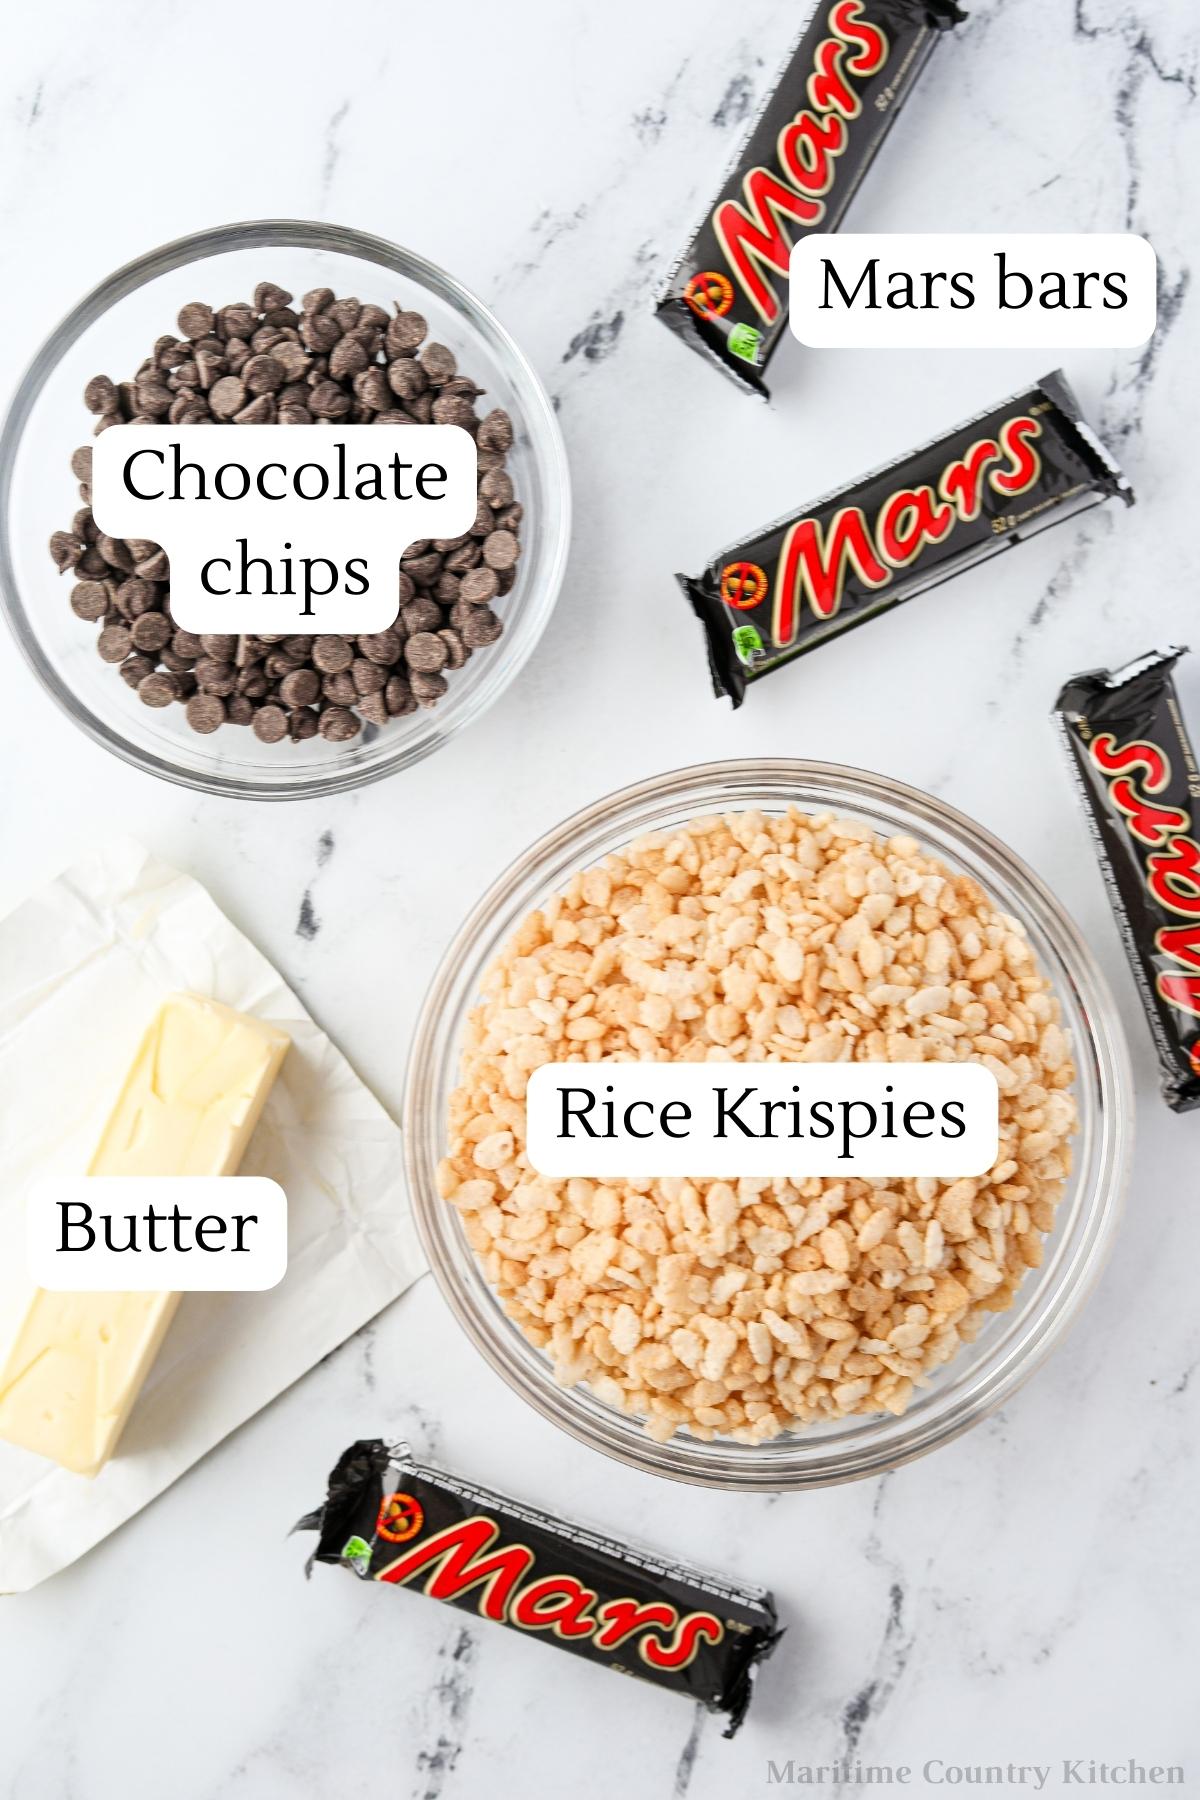 The ingredients needed to make Mars Bar Slice: Rice Krispies, Mars bars, chocolate chips, and butter.